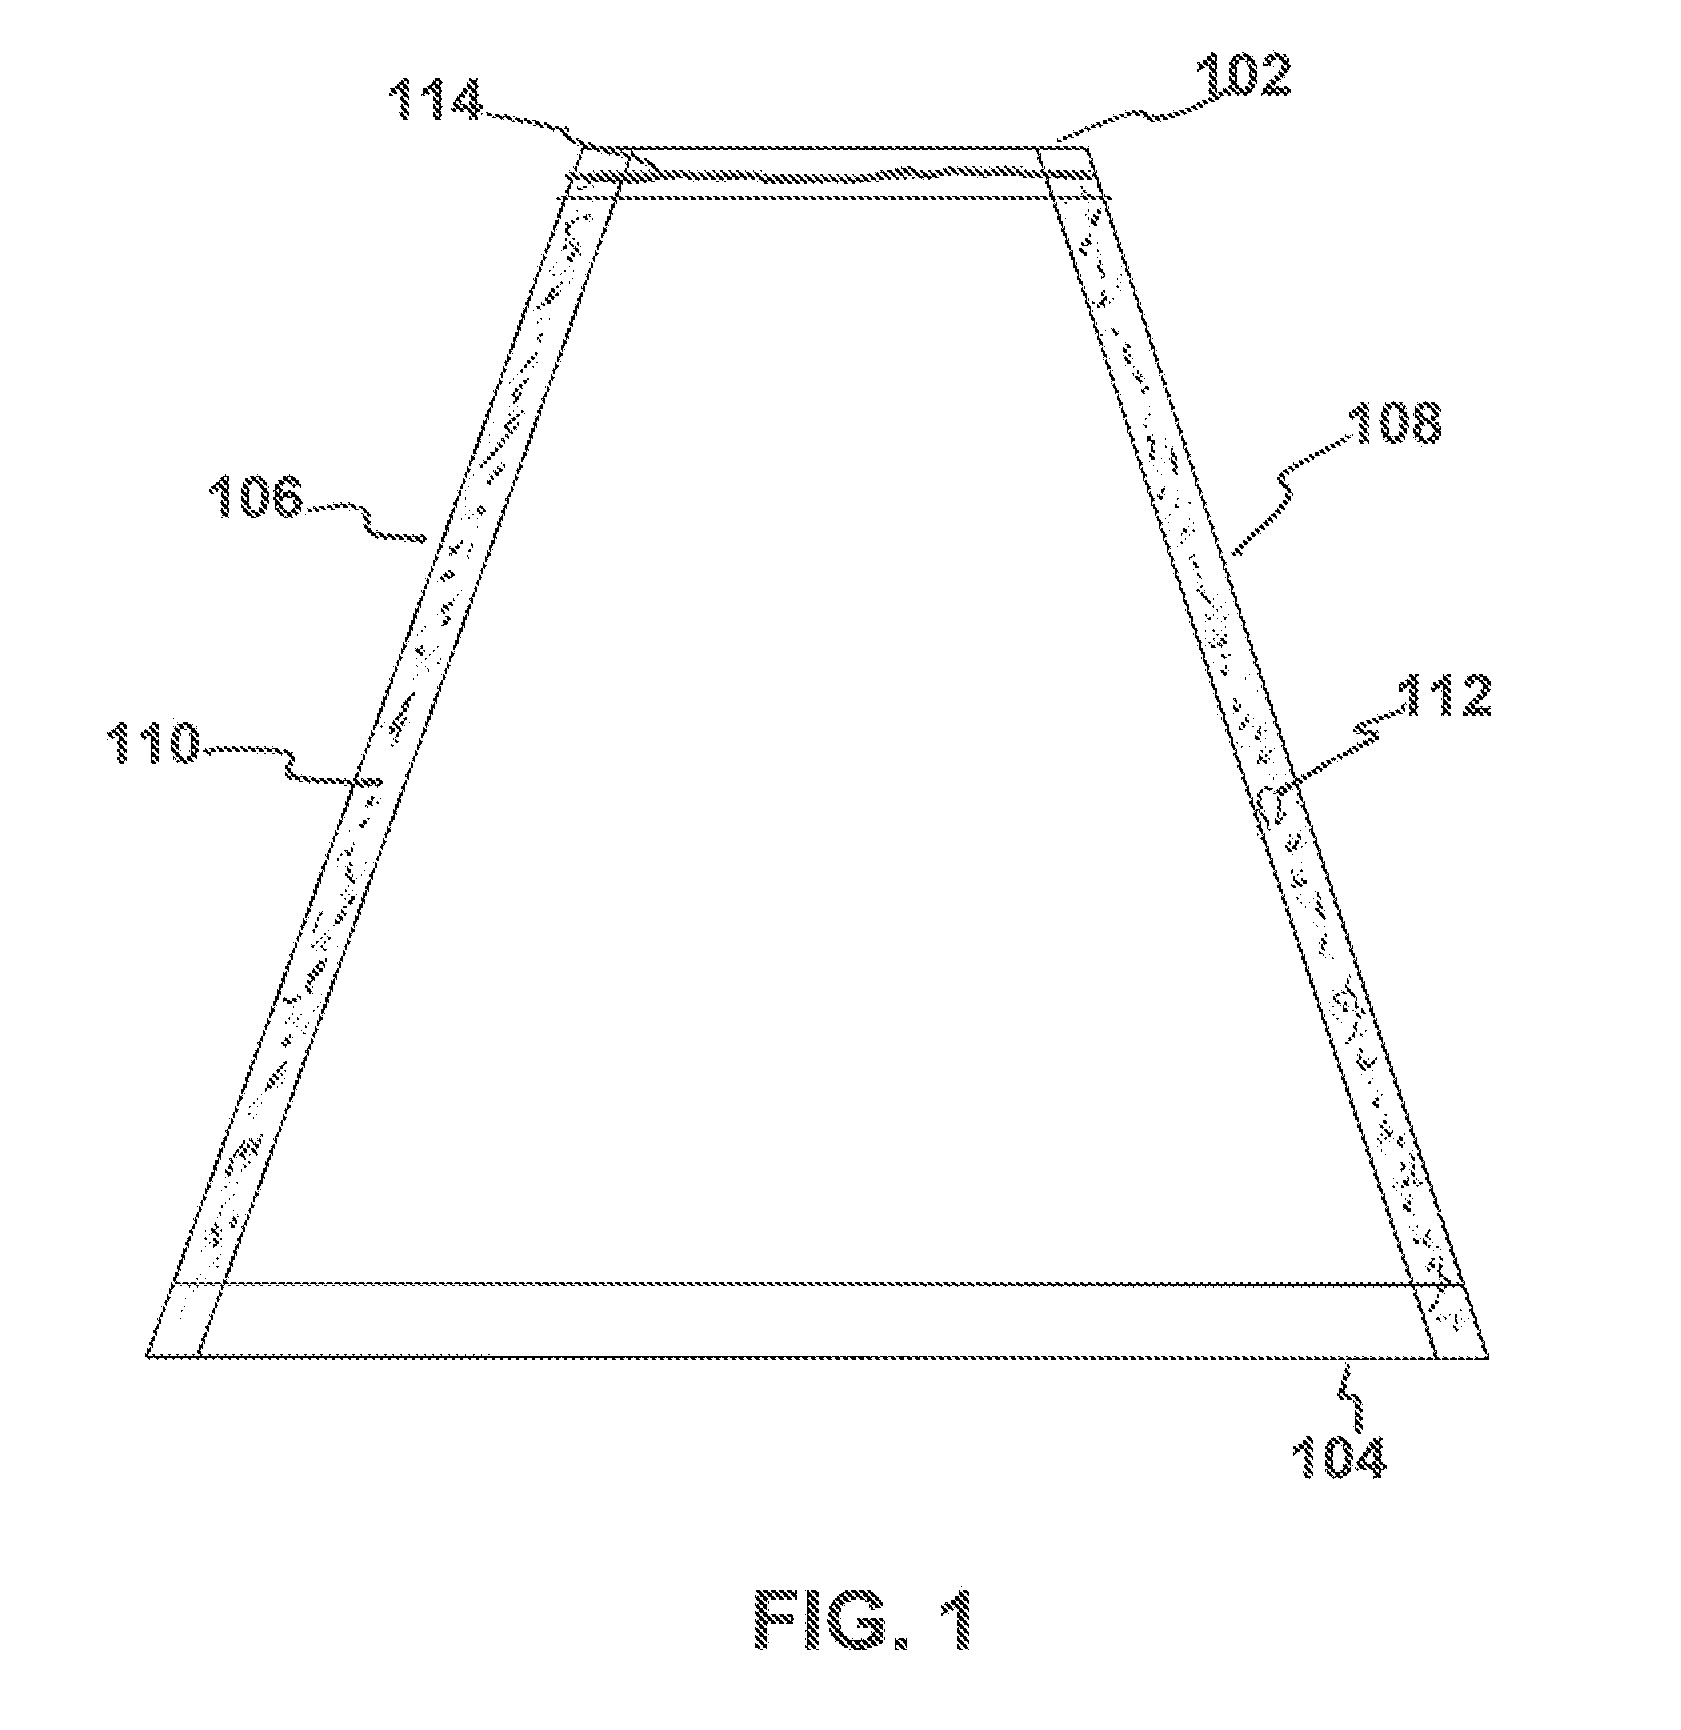 Sound projection device attachable to a user when not in use